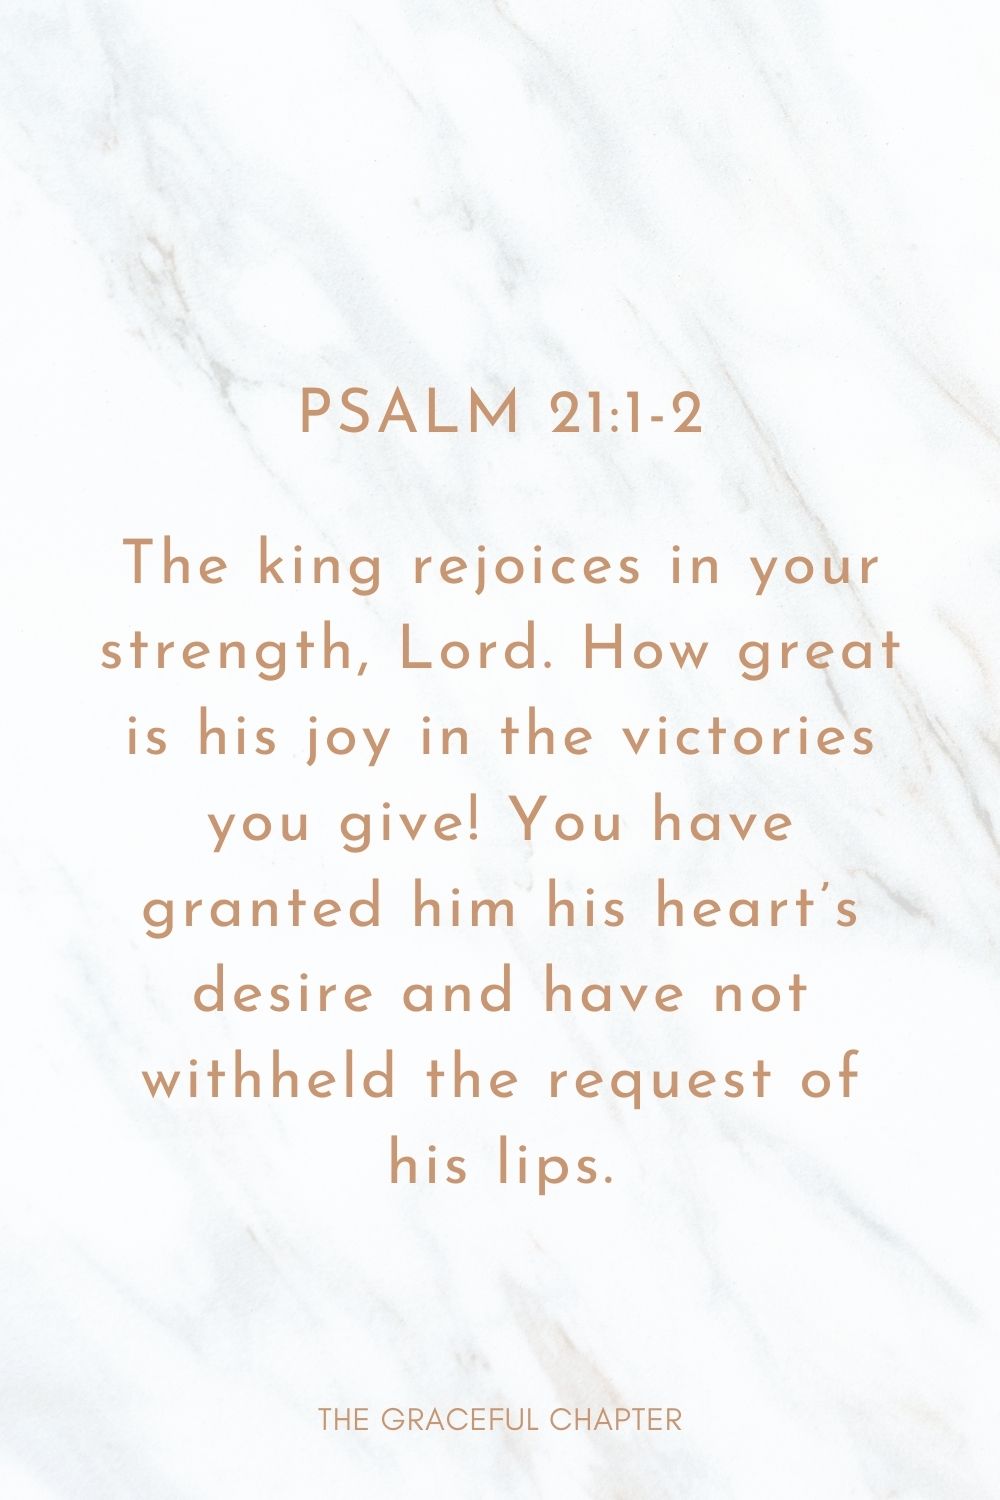 The king rejoices in your strength, Lord. How great is his joy in the victories you give! You have granted him his heart’s desire and have not withheld the request of his lips. Psalm 21:1-2